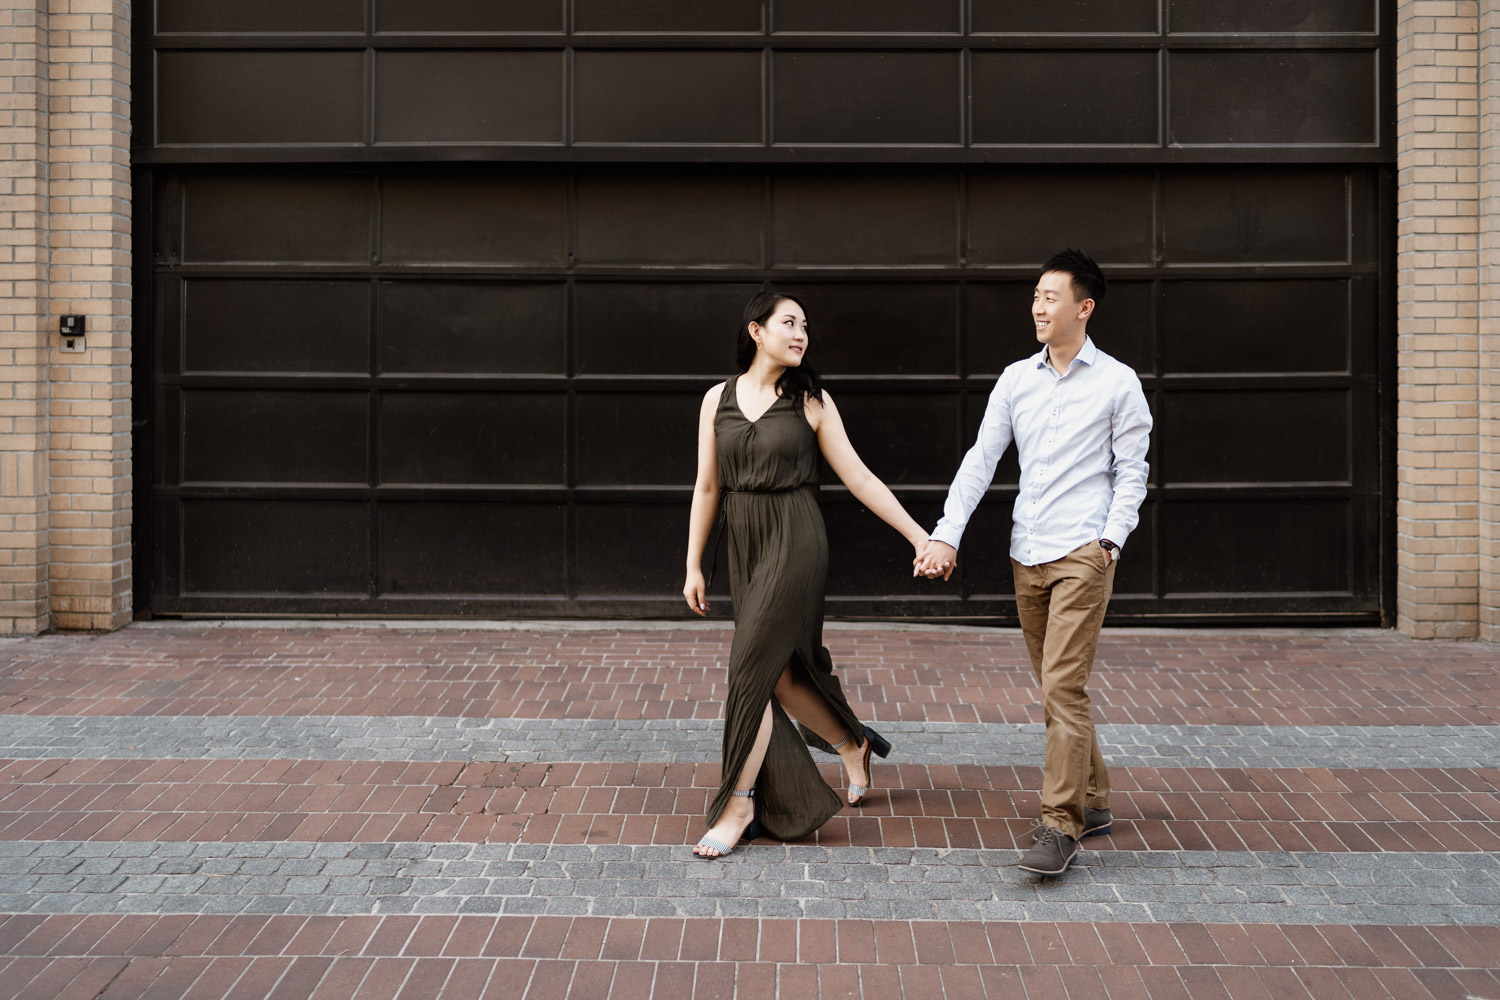 gastown engagement photography in vancouver bc during summer at sunset or golden hour